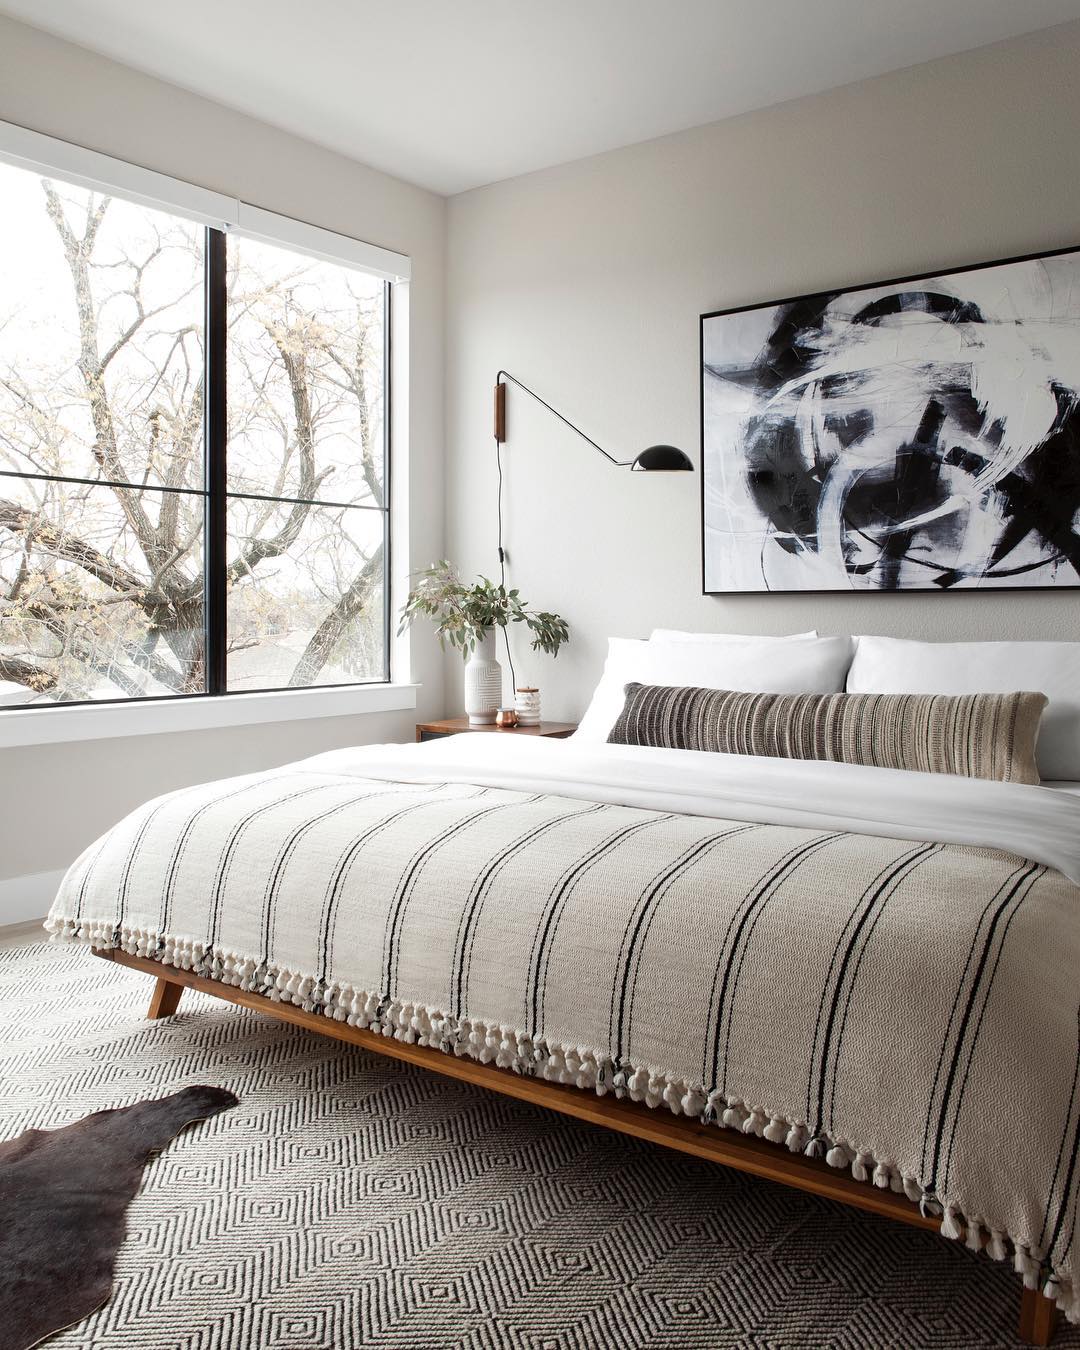 Minimalist bedroom with nicely made bed. Photo by Instagram user @mattigreshaminteriors